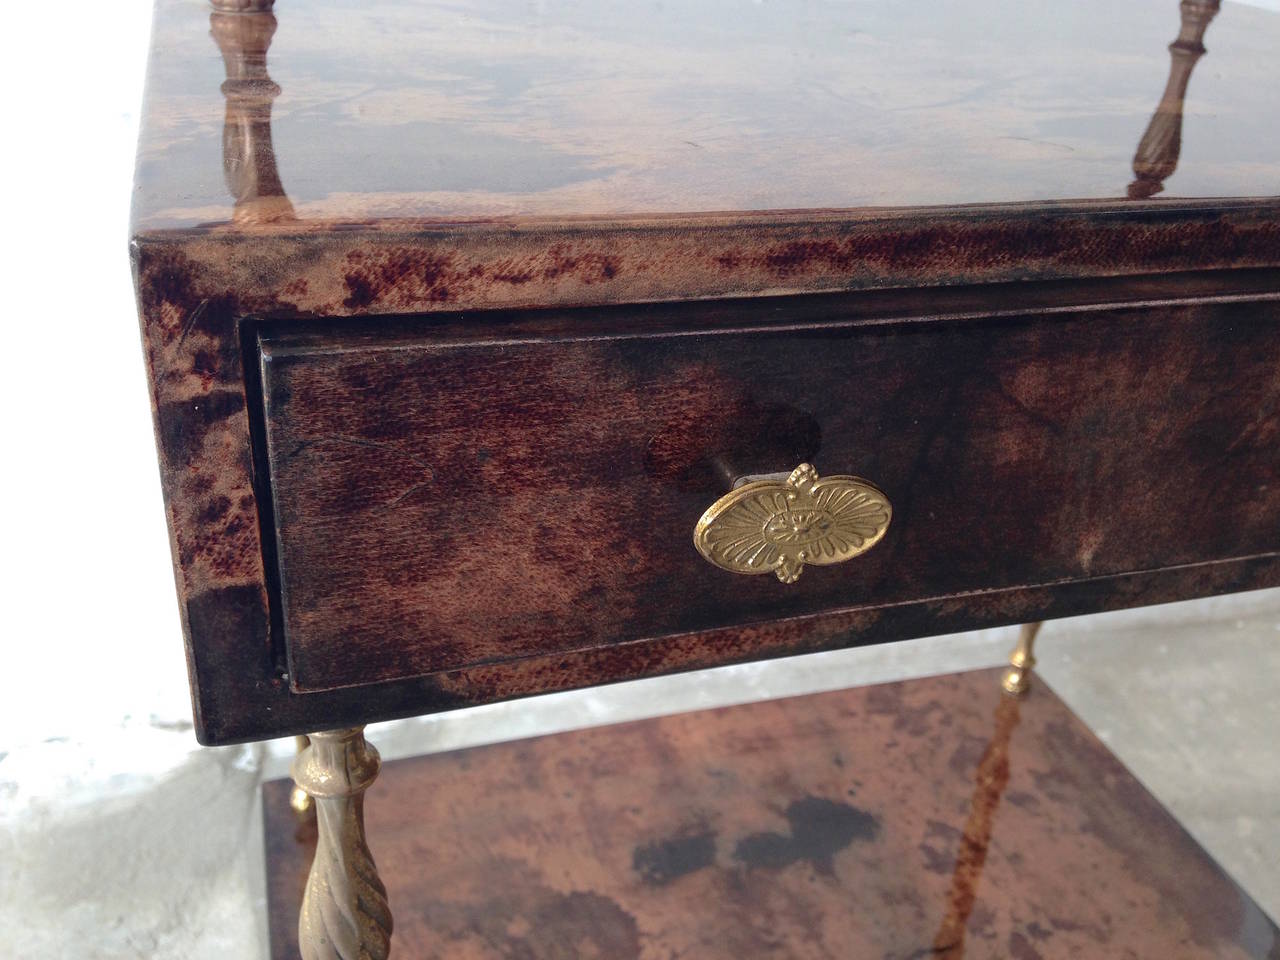 Aldo Tura brown goatskin parchment side table with one drawer. The table consisting to three levels and a drawer. Nice Brass details. 

Aldo Tura started in the 30's and fully developed in the 50's a successful business designing pieces that were